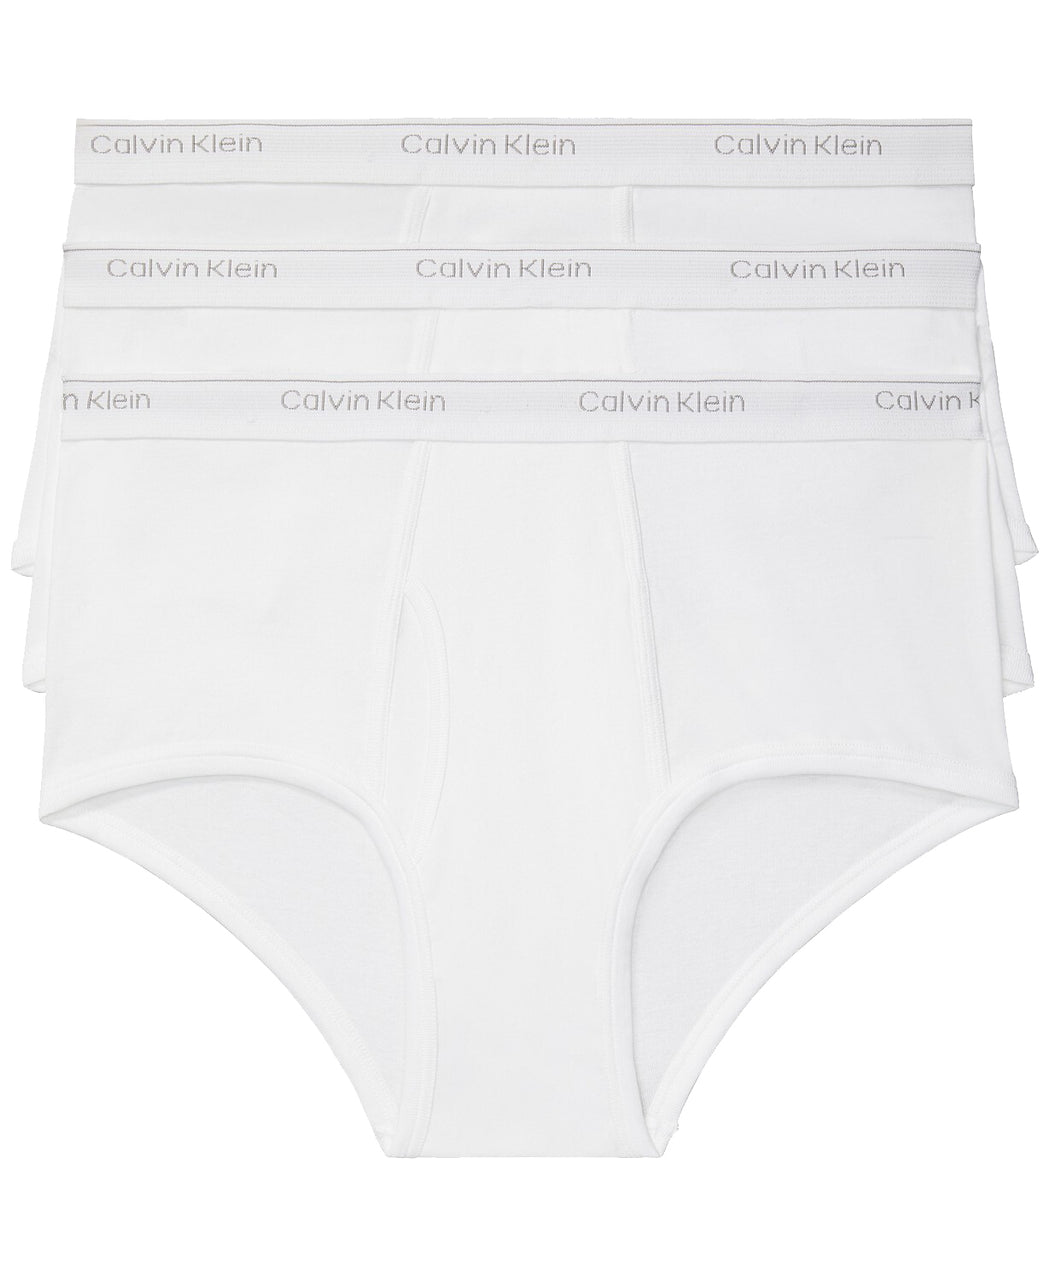 Calvin Klein Men\'s Big 3 and Briefs Classics Cotton Underwear Pack Wanted – Tall